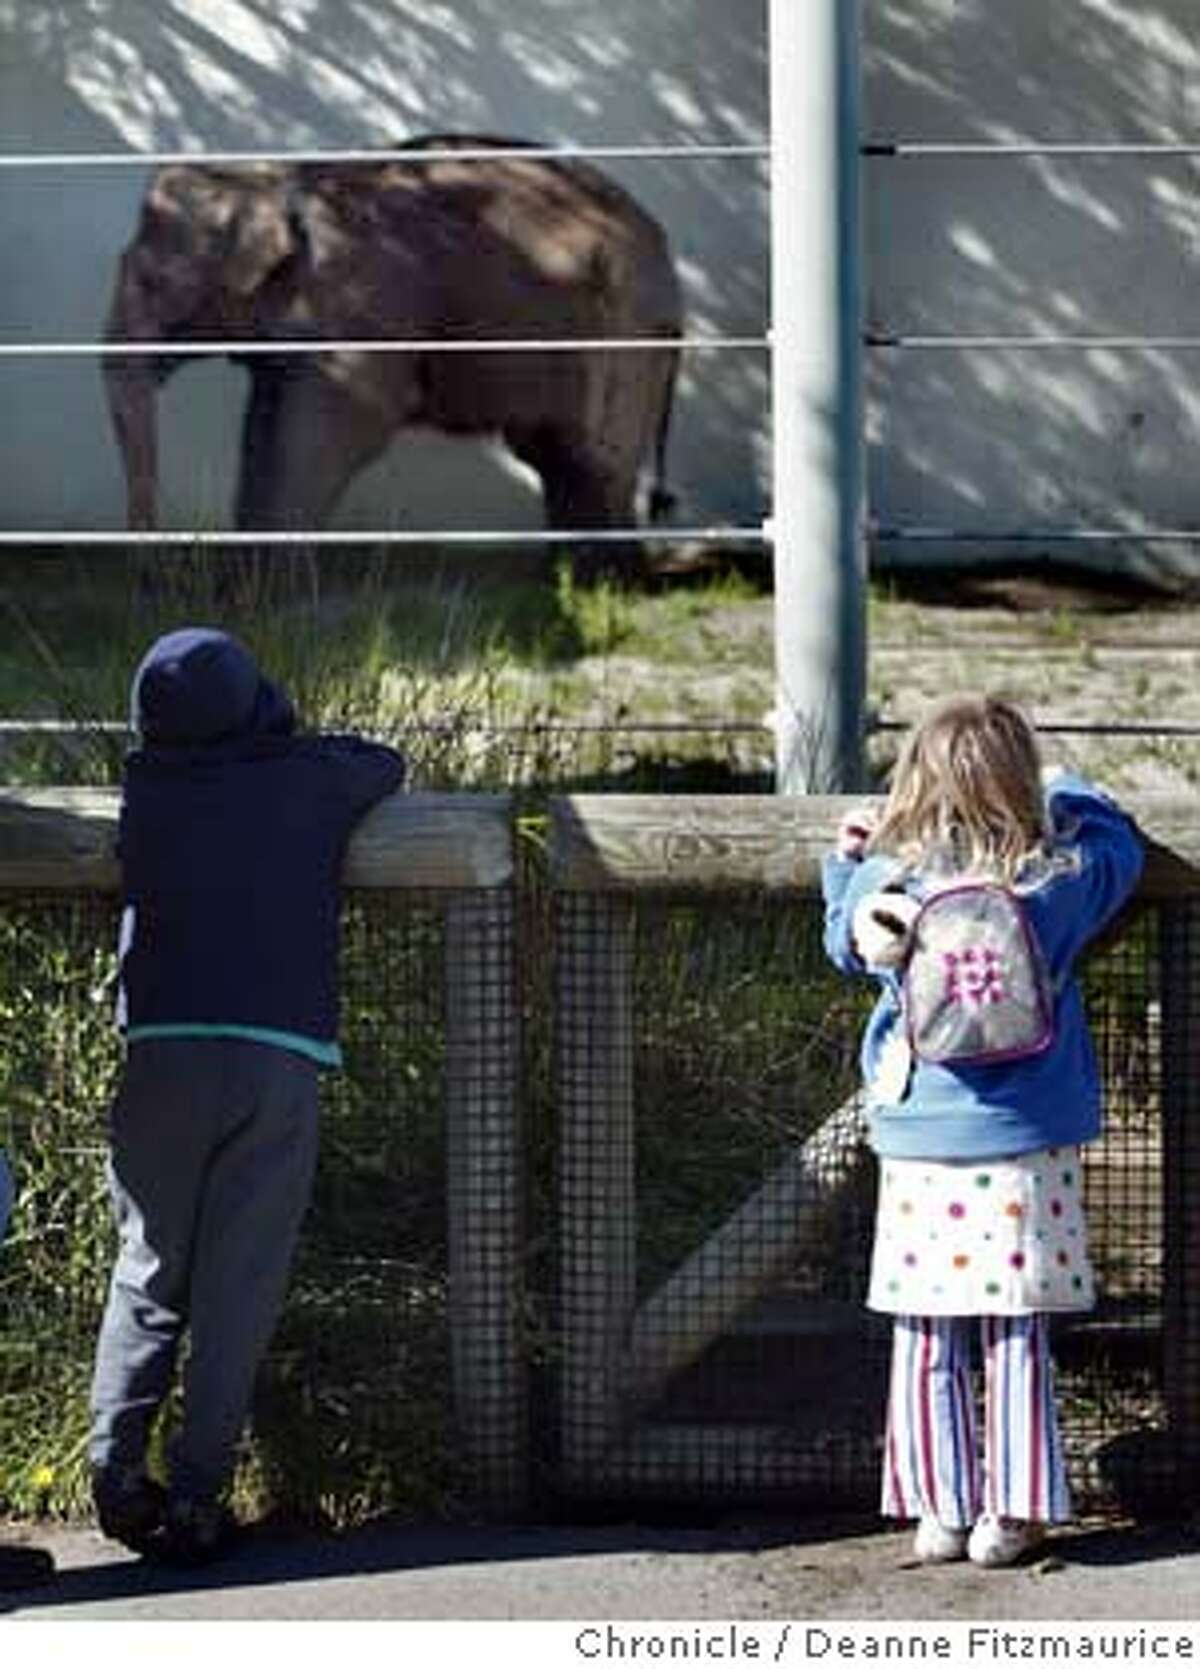 (l to r) Chandler Thistle, 8, and his sister, Chloe, 4 from SF look at Calle who stands against a wall for support. Calle, the elephant at San Francisco Zoo will be put to sleep soon. She is ailing from a hip problem and tuberculosis. Deanne Fitzmaurice / The Chronicle